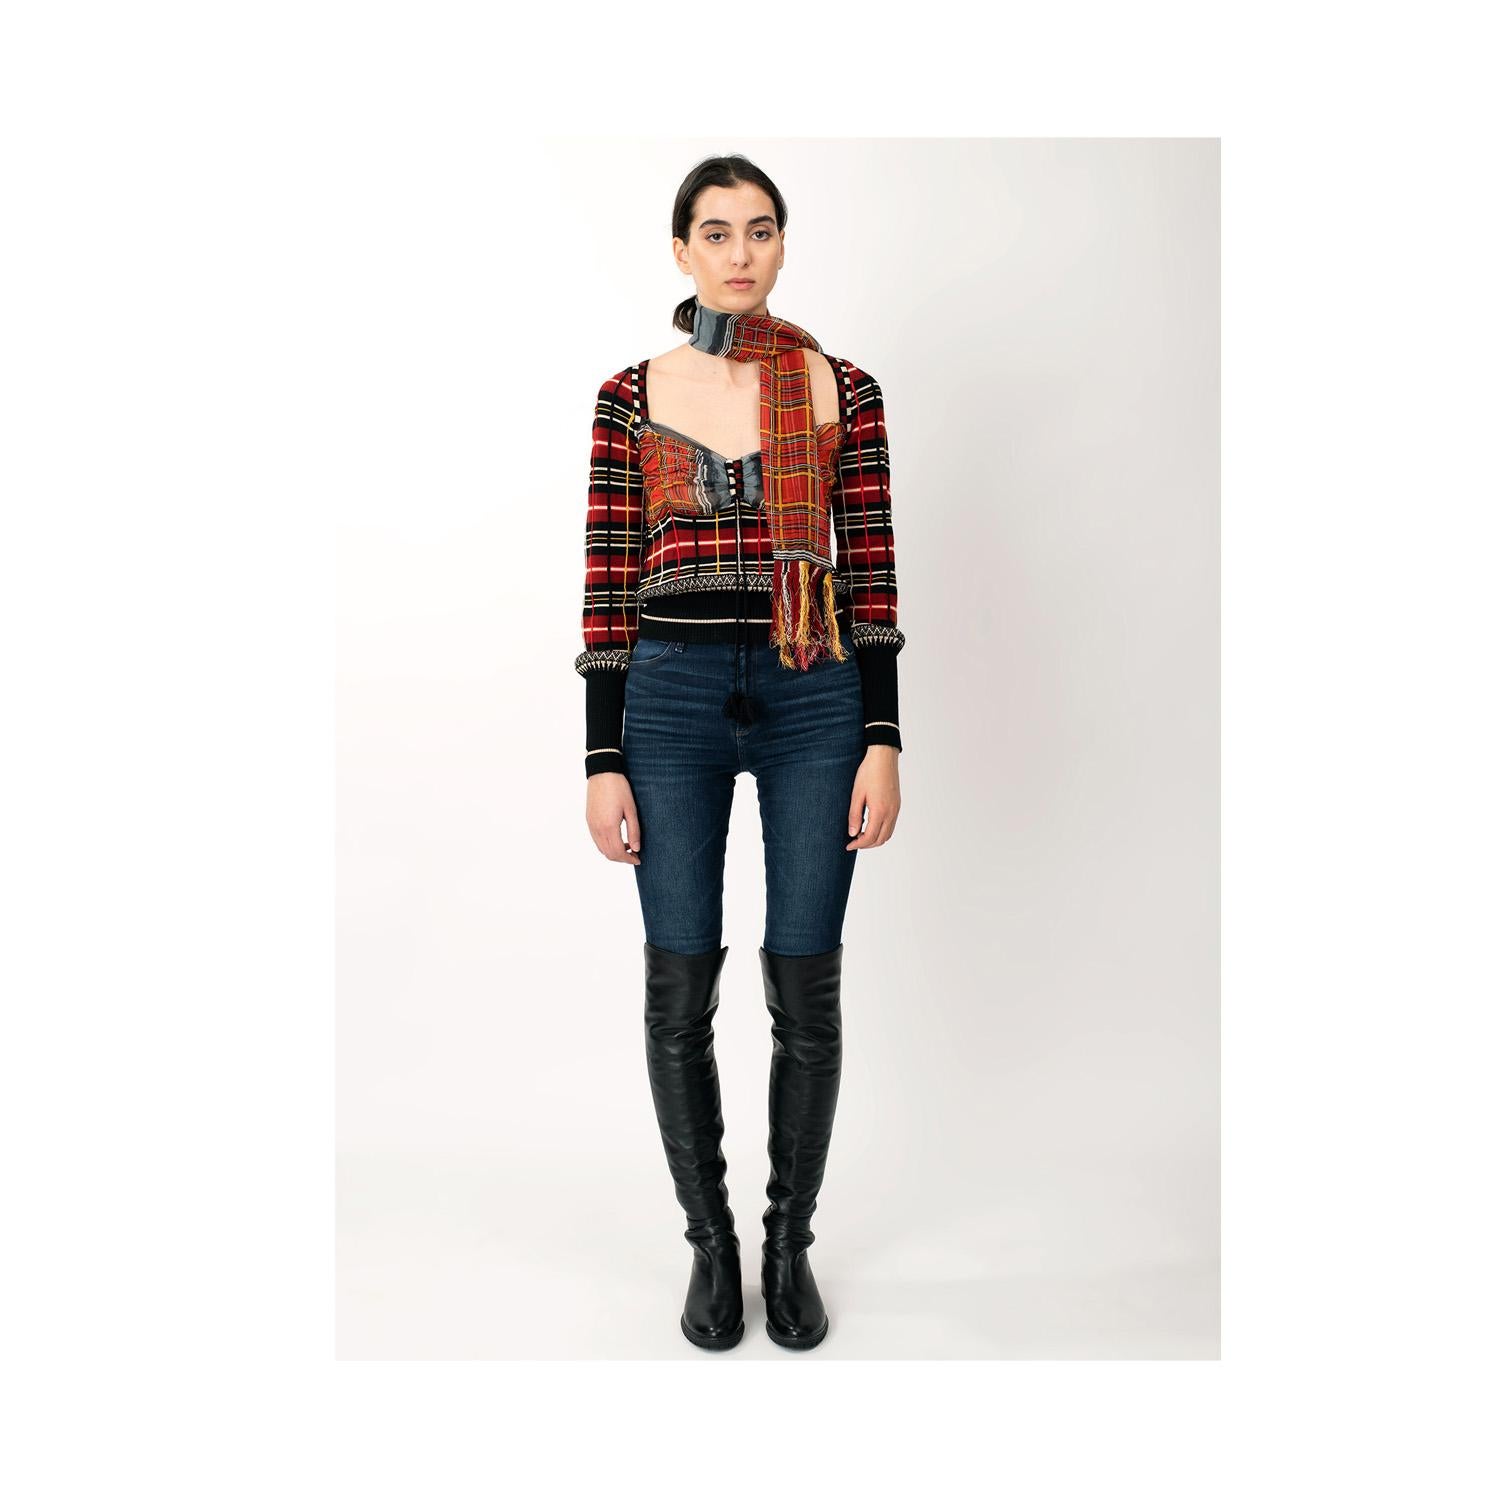 Jean Paul Gaultier Maille red tartan knit top with scarf.